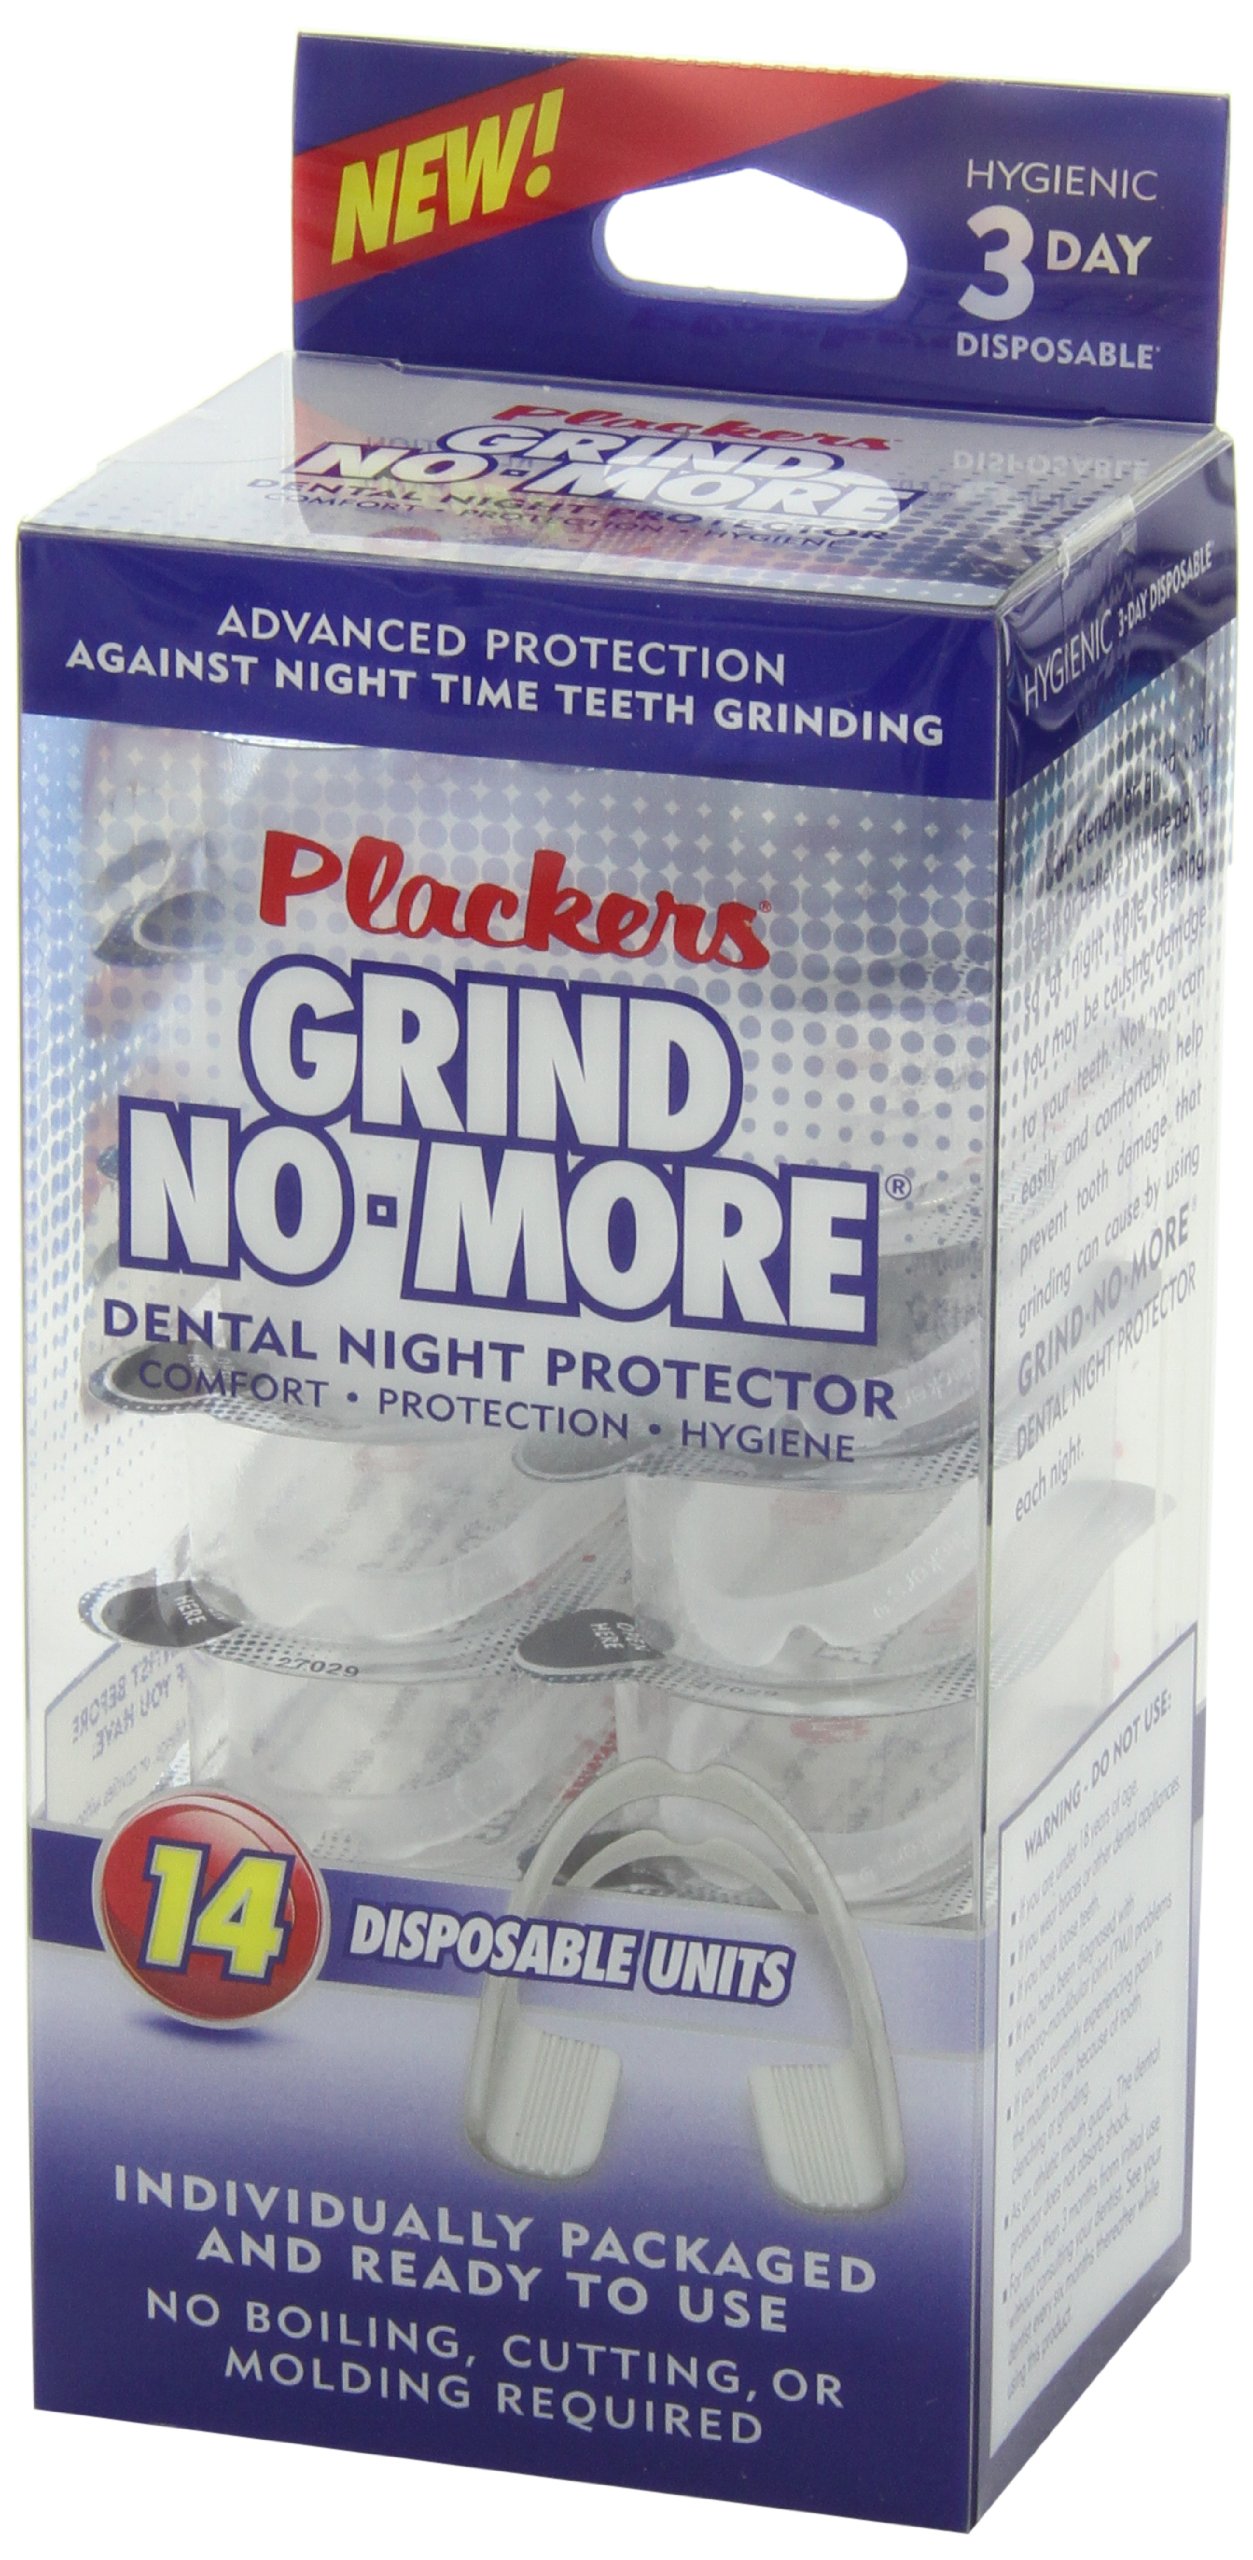 Plackers Grind No More Dental Night Guard for Teeth Grinding, 14 Count